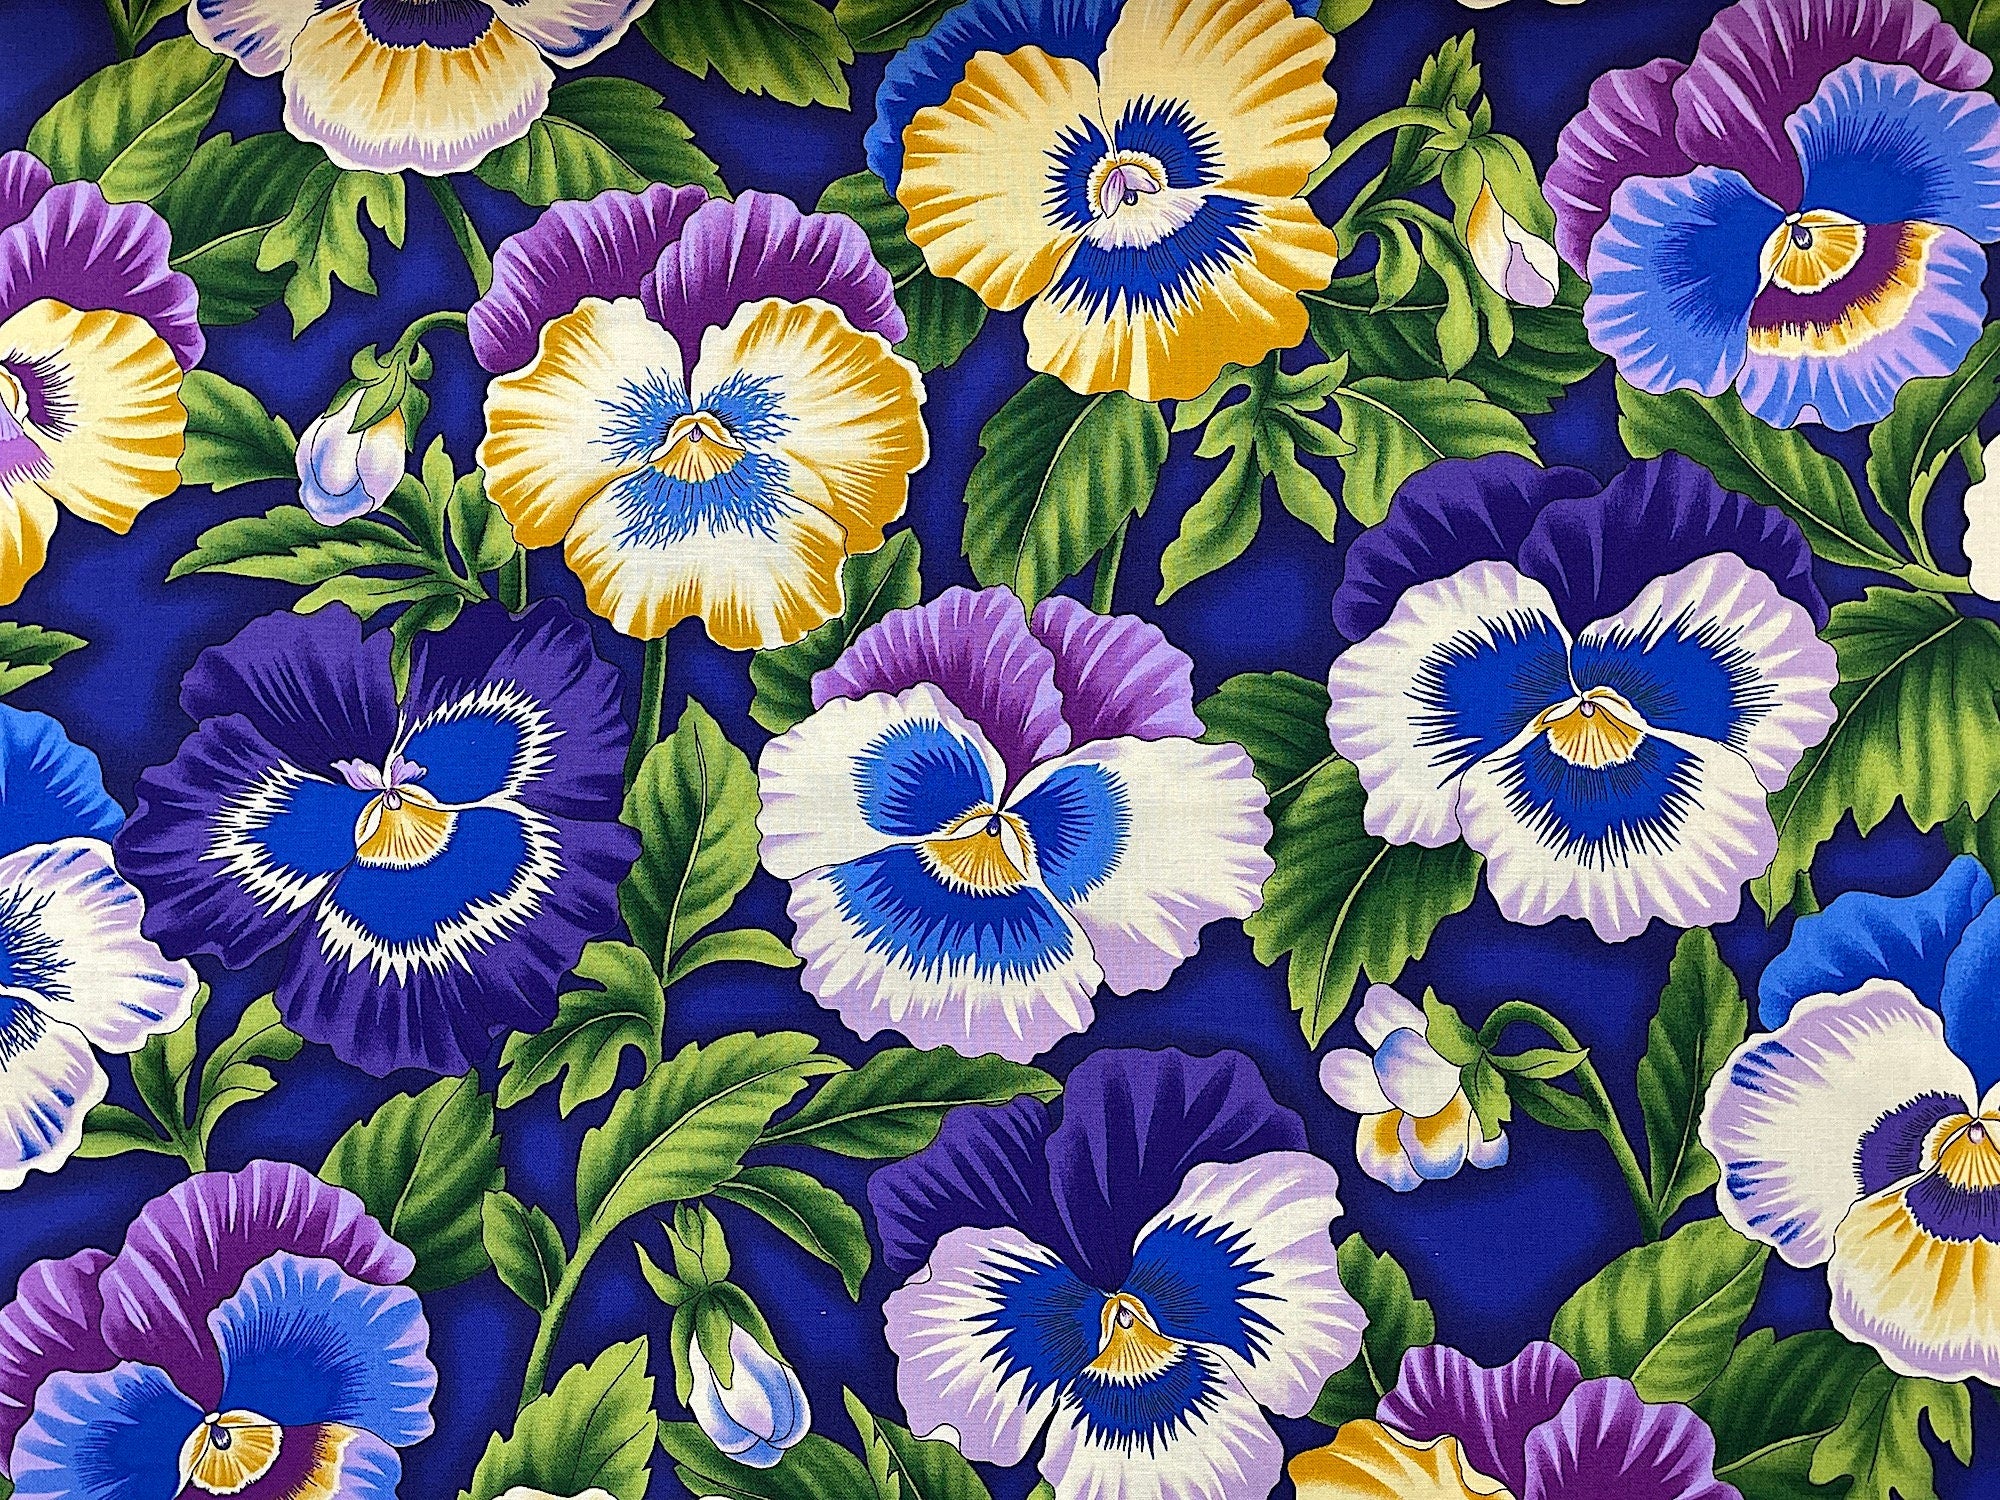 This cotton fabric is covered with purple, white and yellow pansies and green leaves.